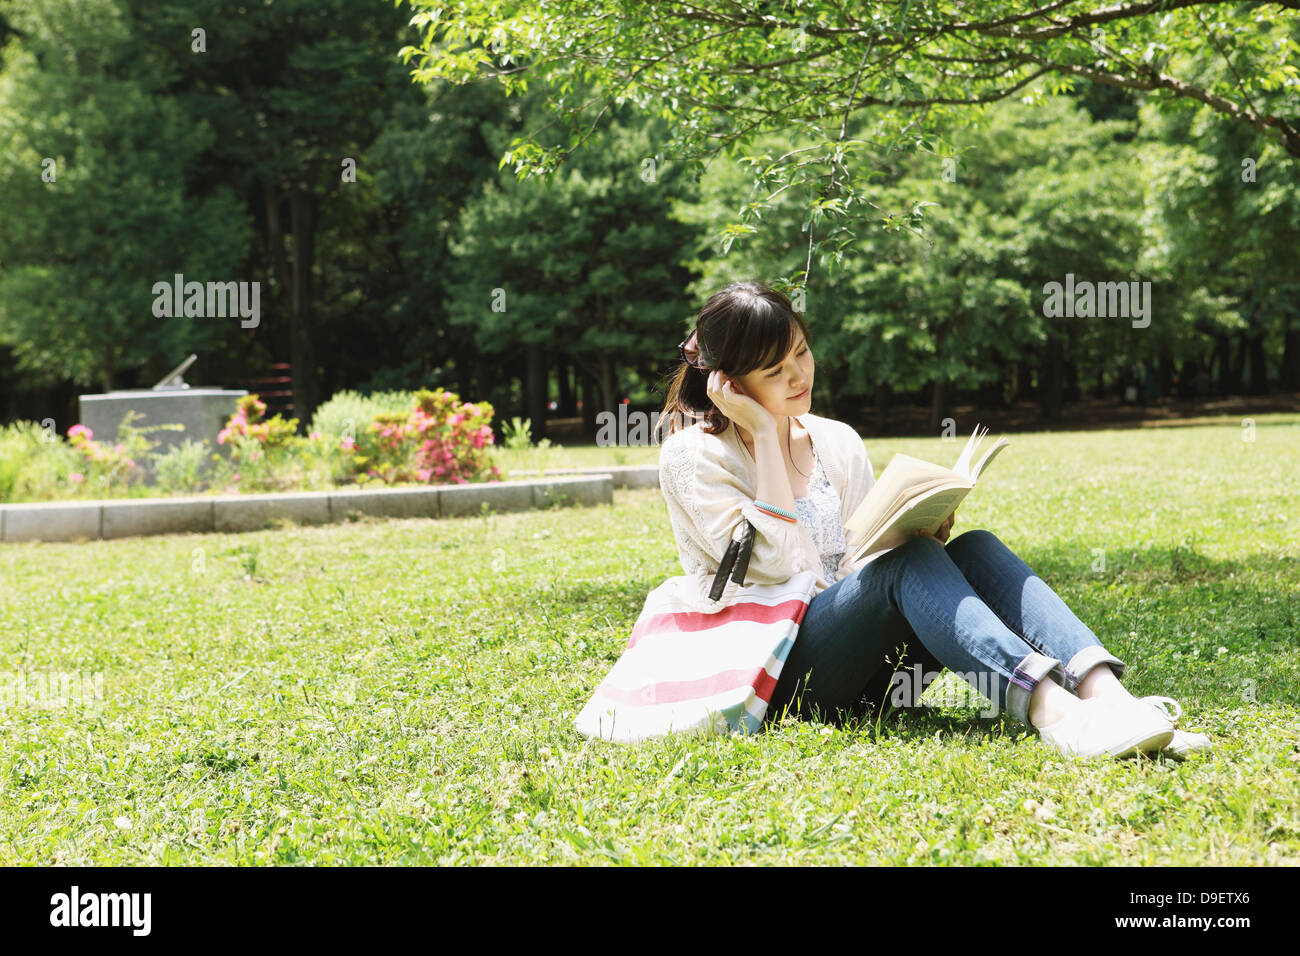 Female college student reading a book on grassland Stock Photo